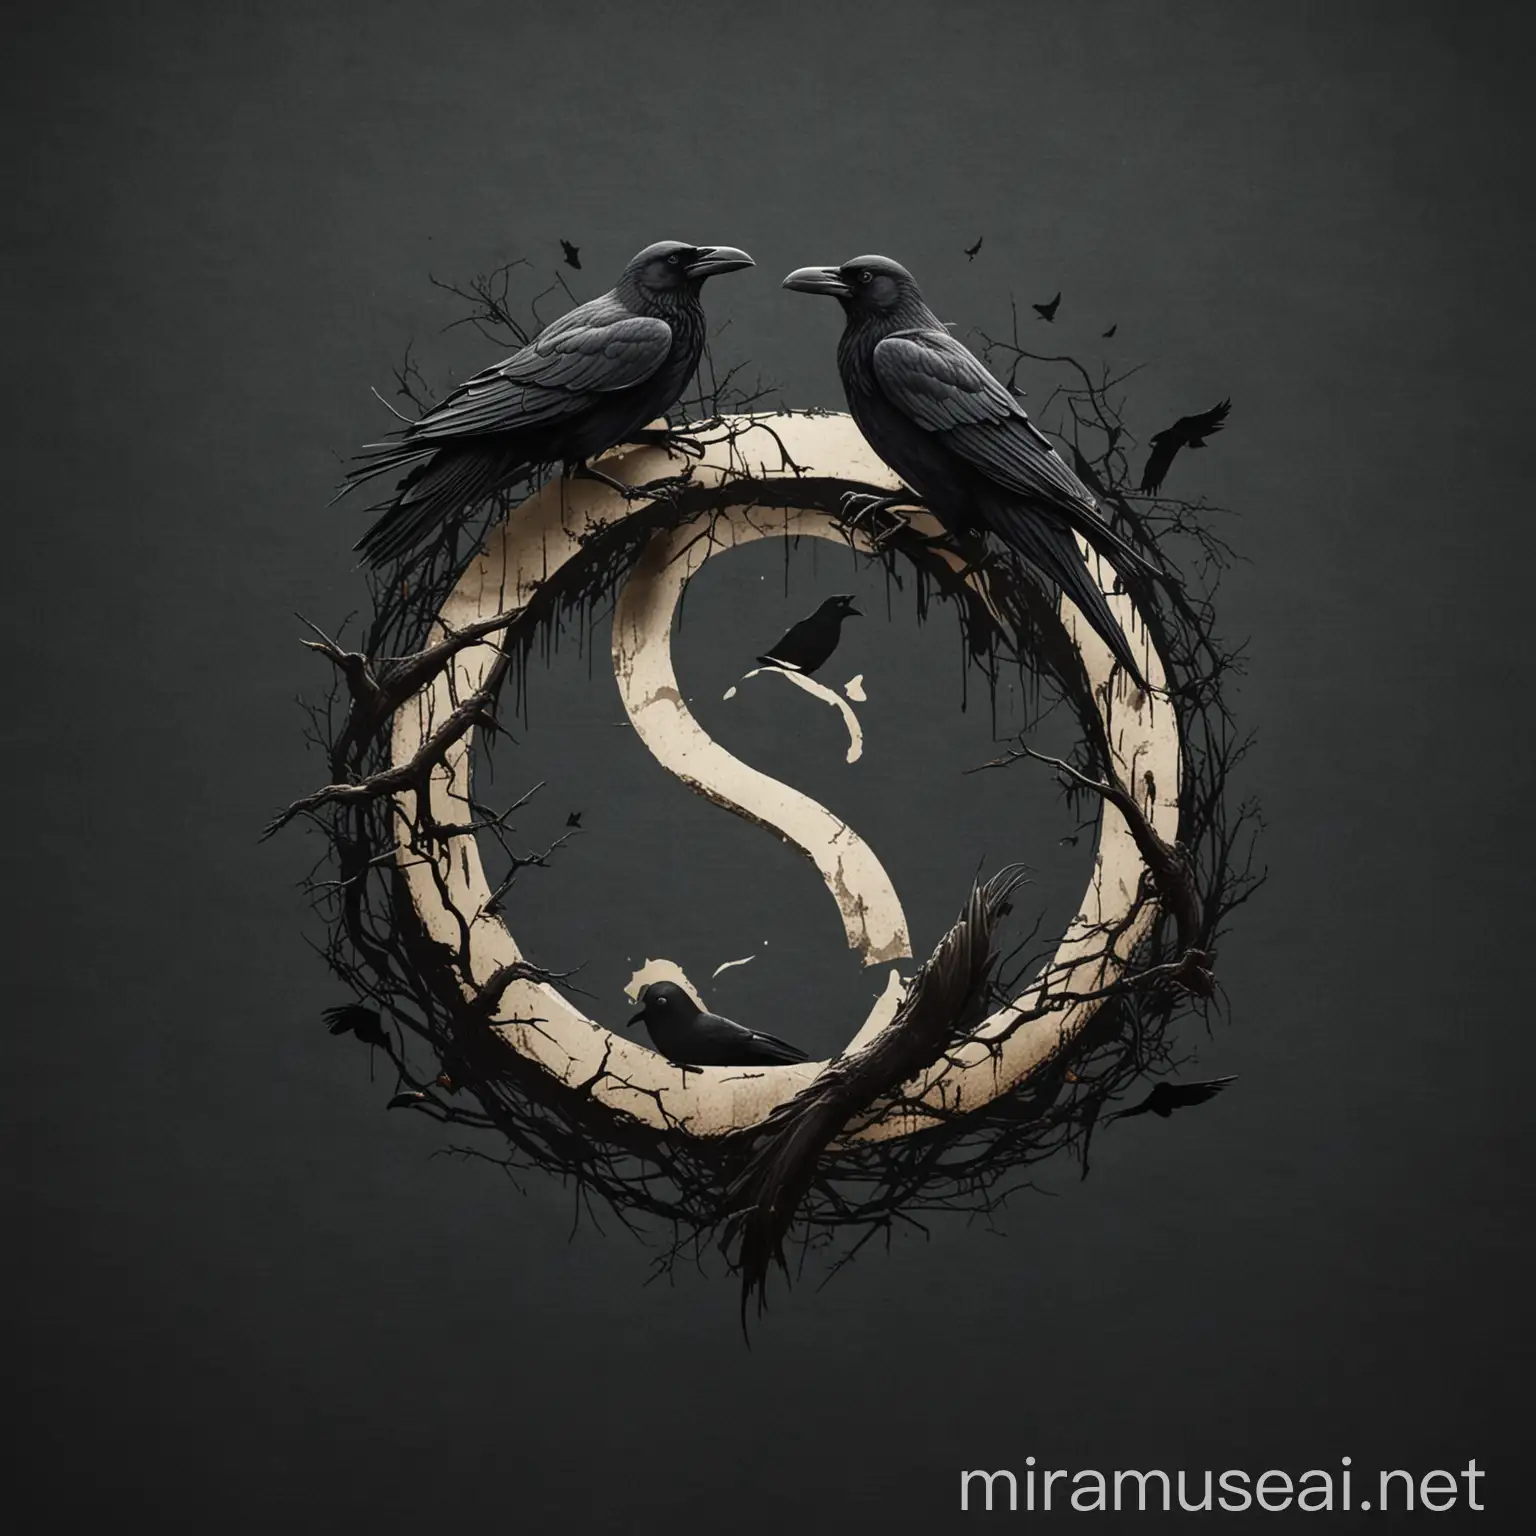 Majestic S Logo Surrounded by Crows